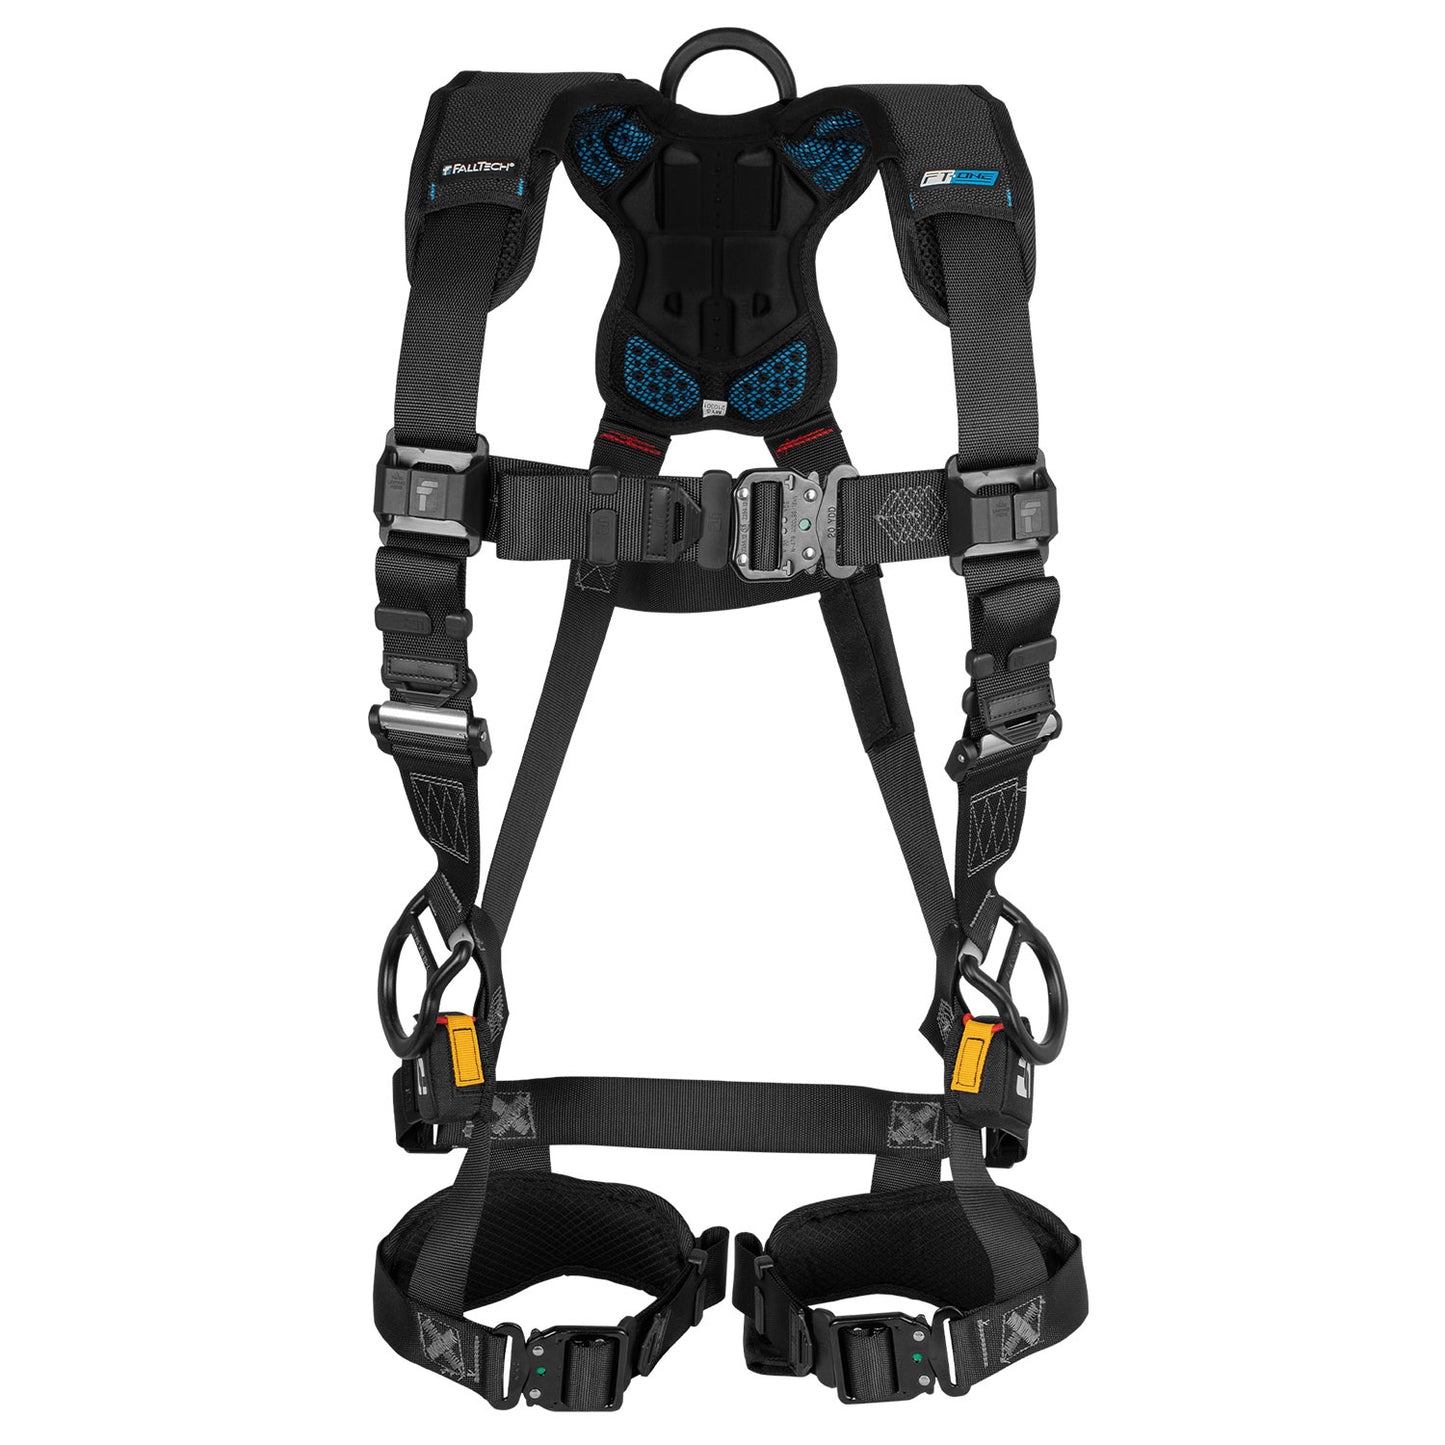 FallTech FT-One Fit Women's Safety Harness w/ Trauma Straps | Non-Belted | S | 81293DQCS